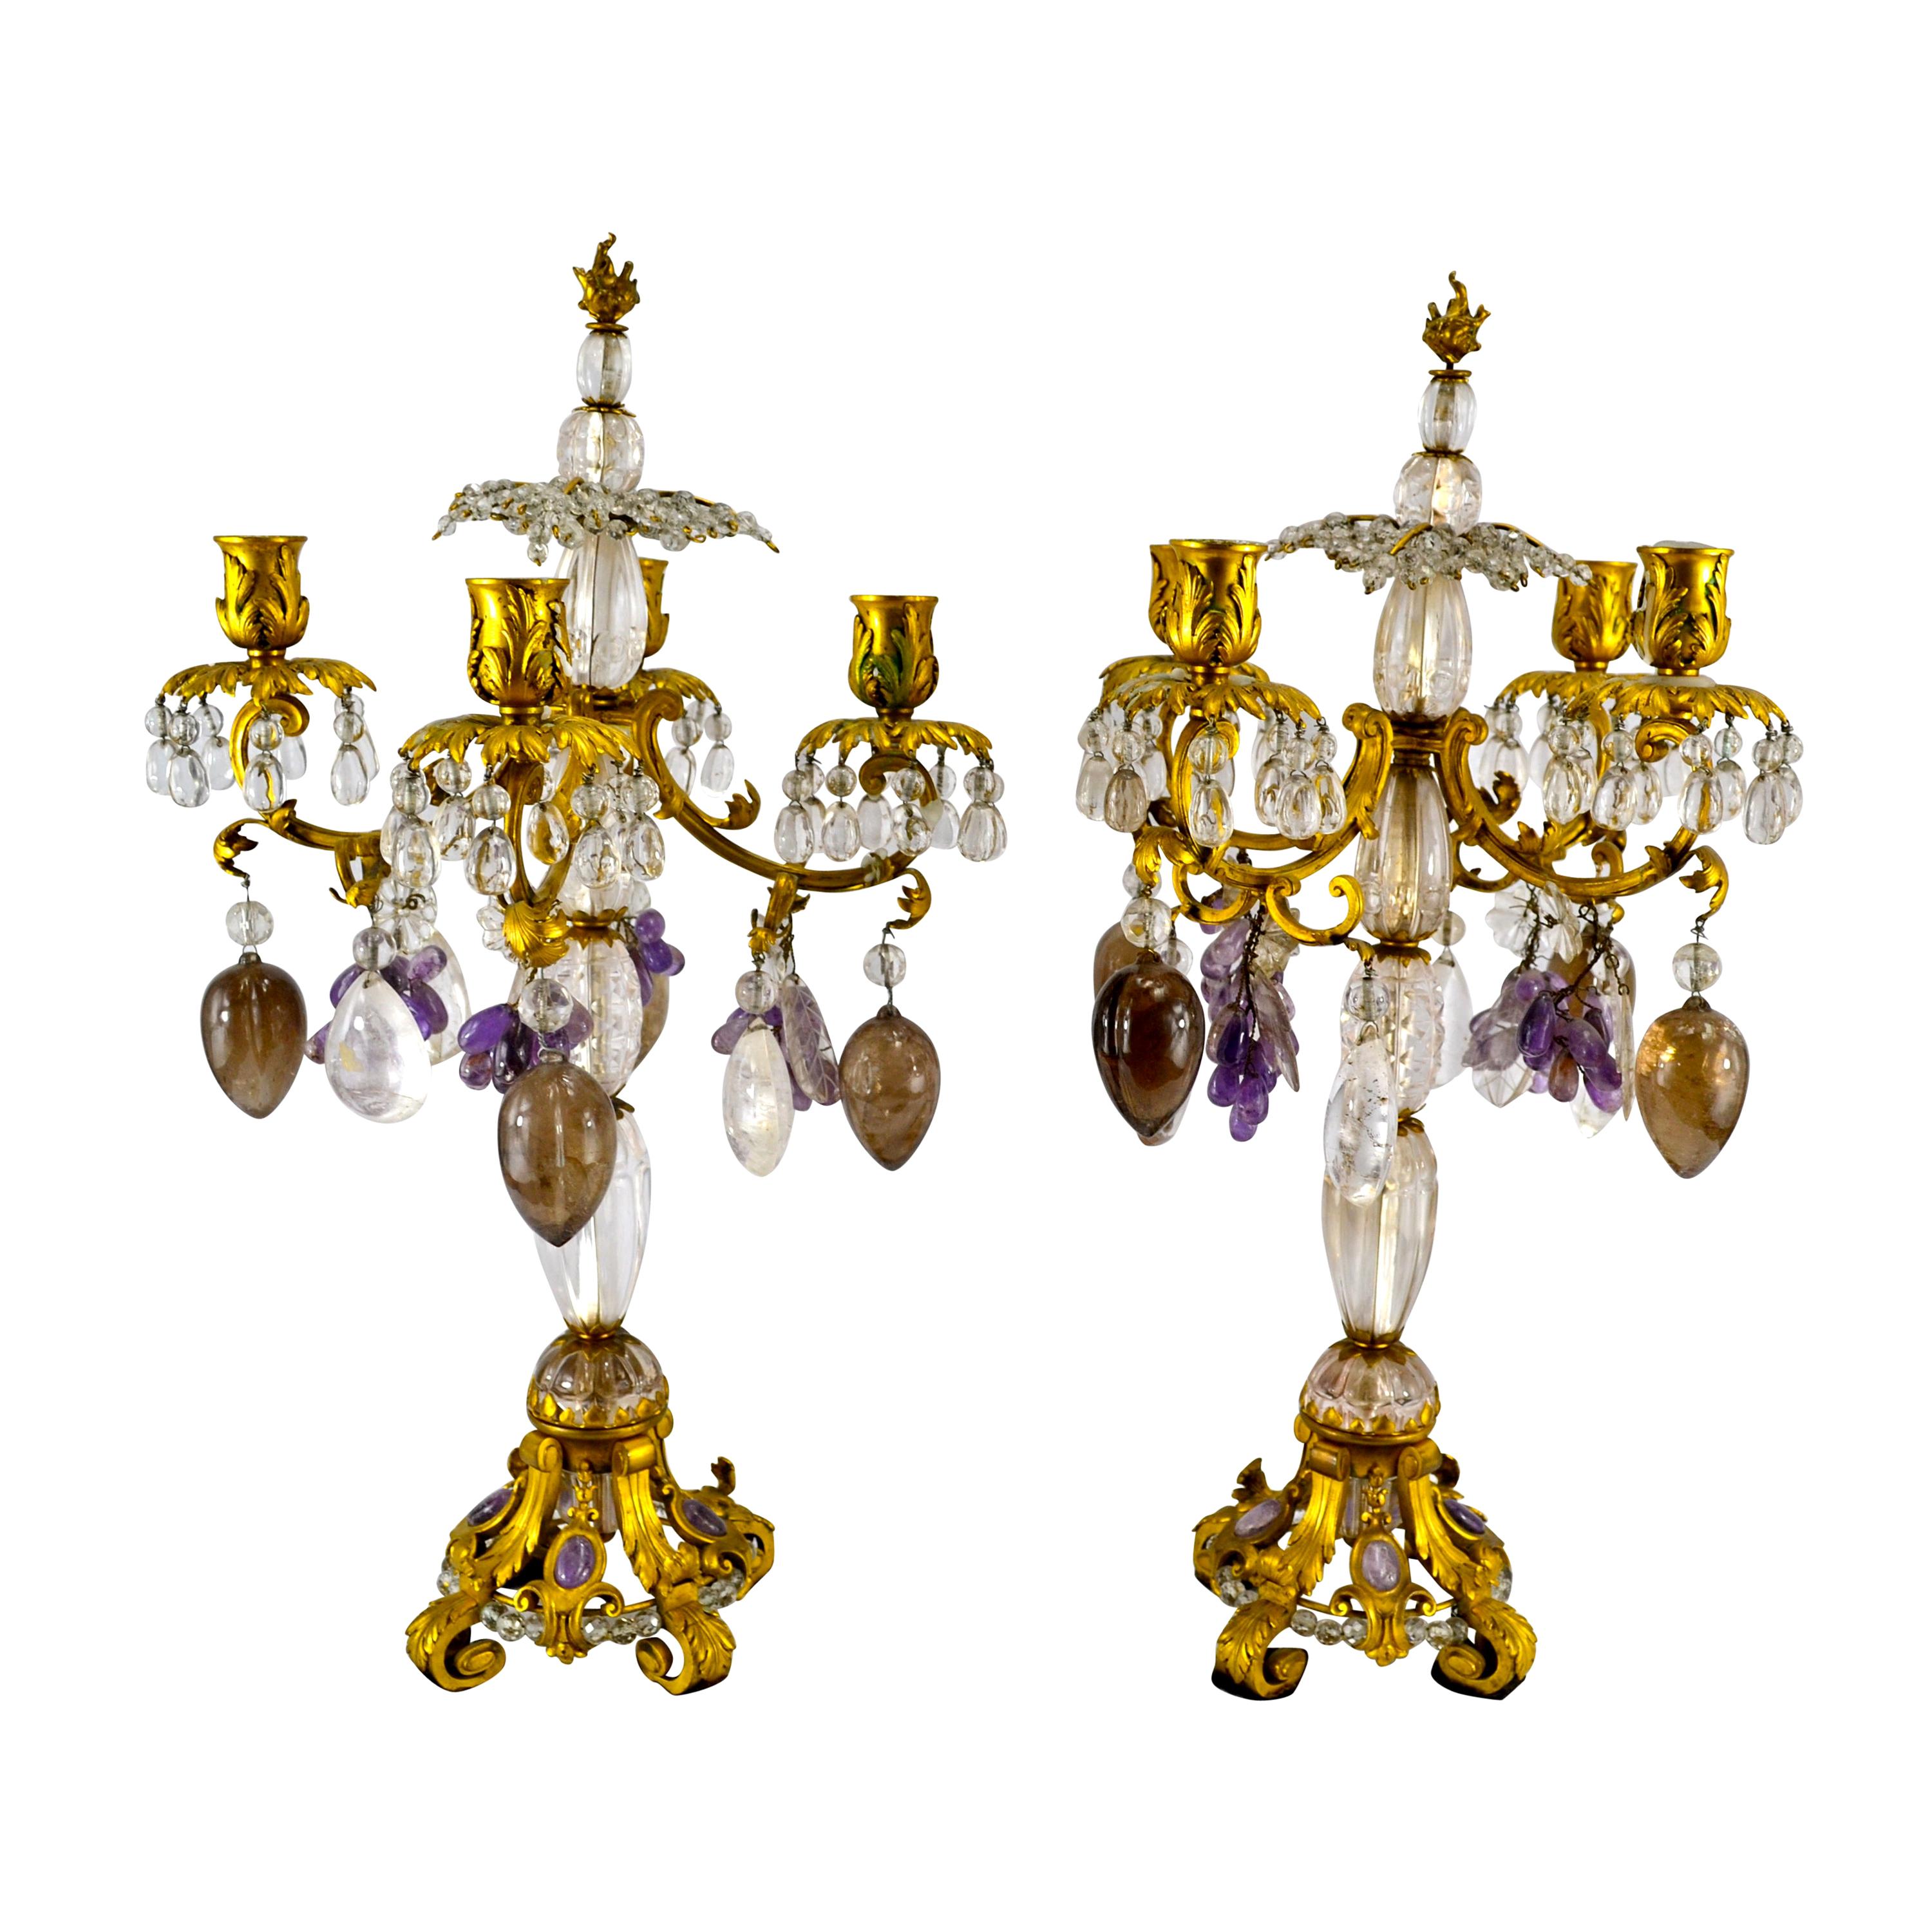 Pair of Louis XV Style Gilt Bronze Rock Crystal and Amethyst Candelabra